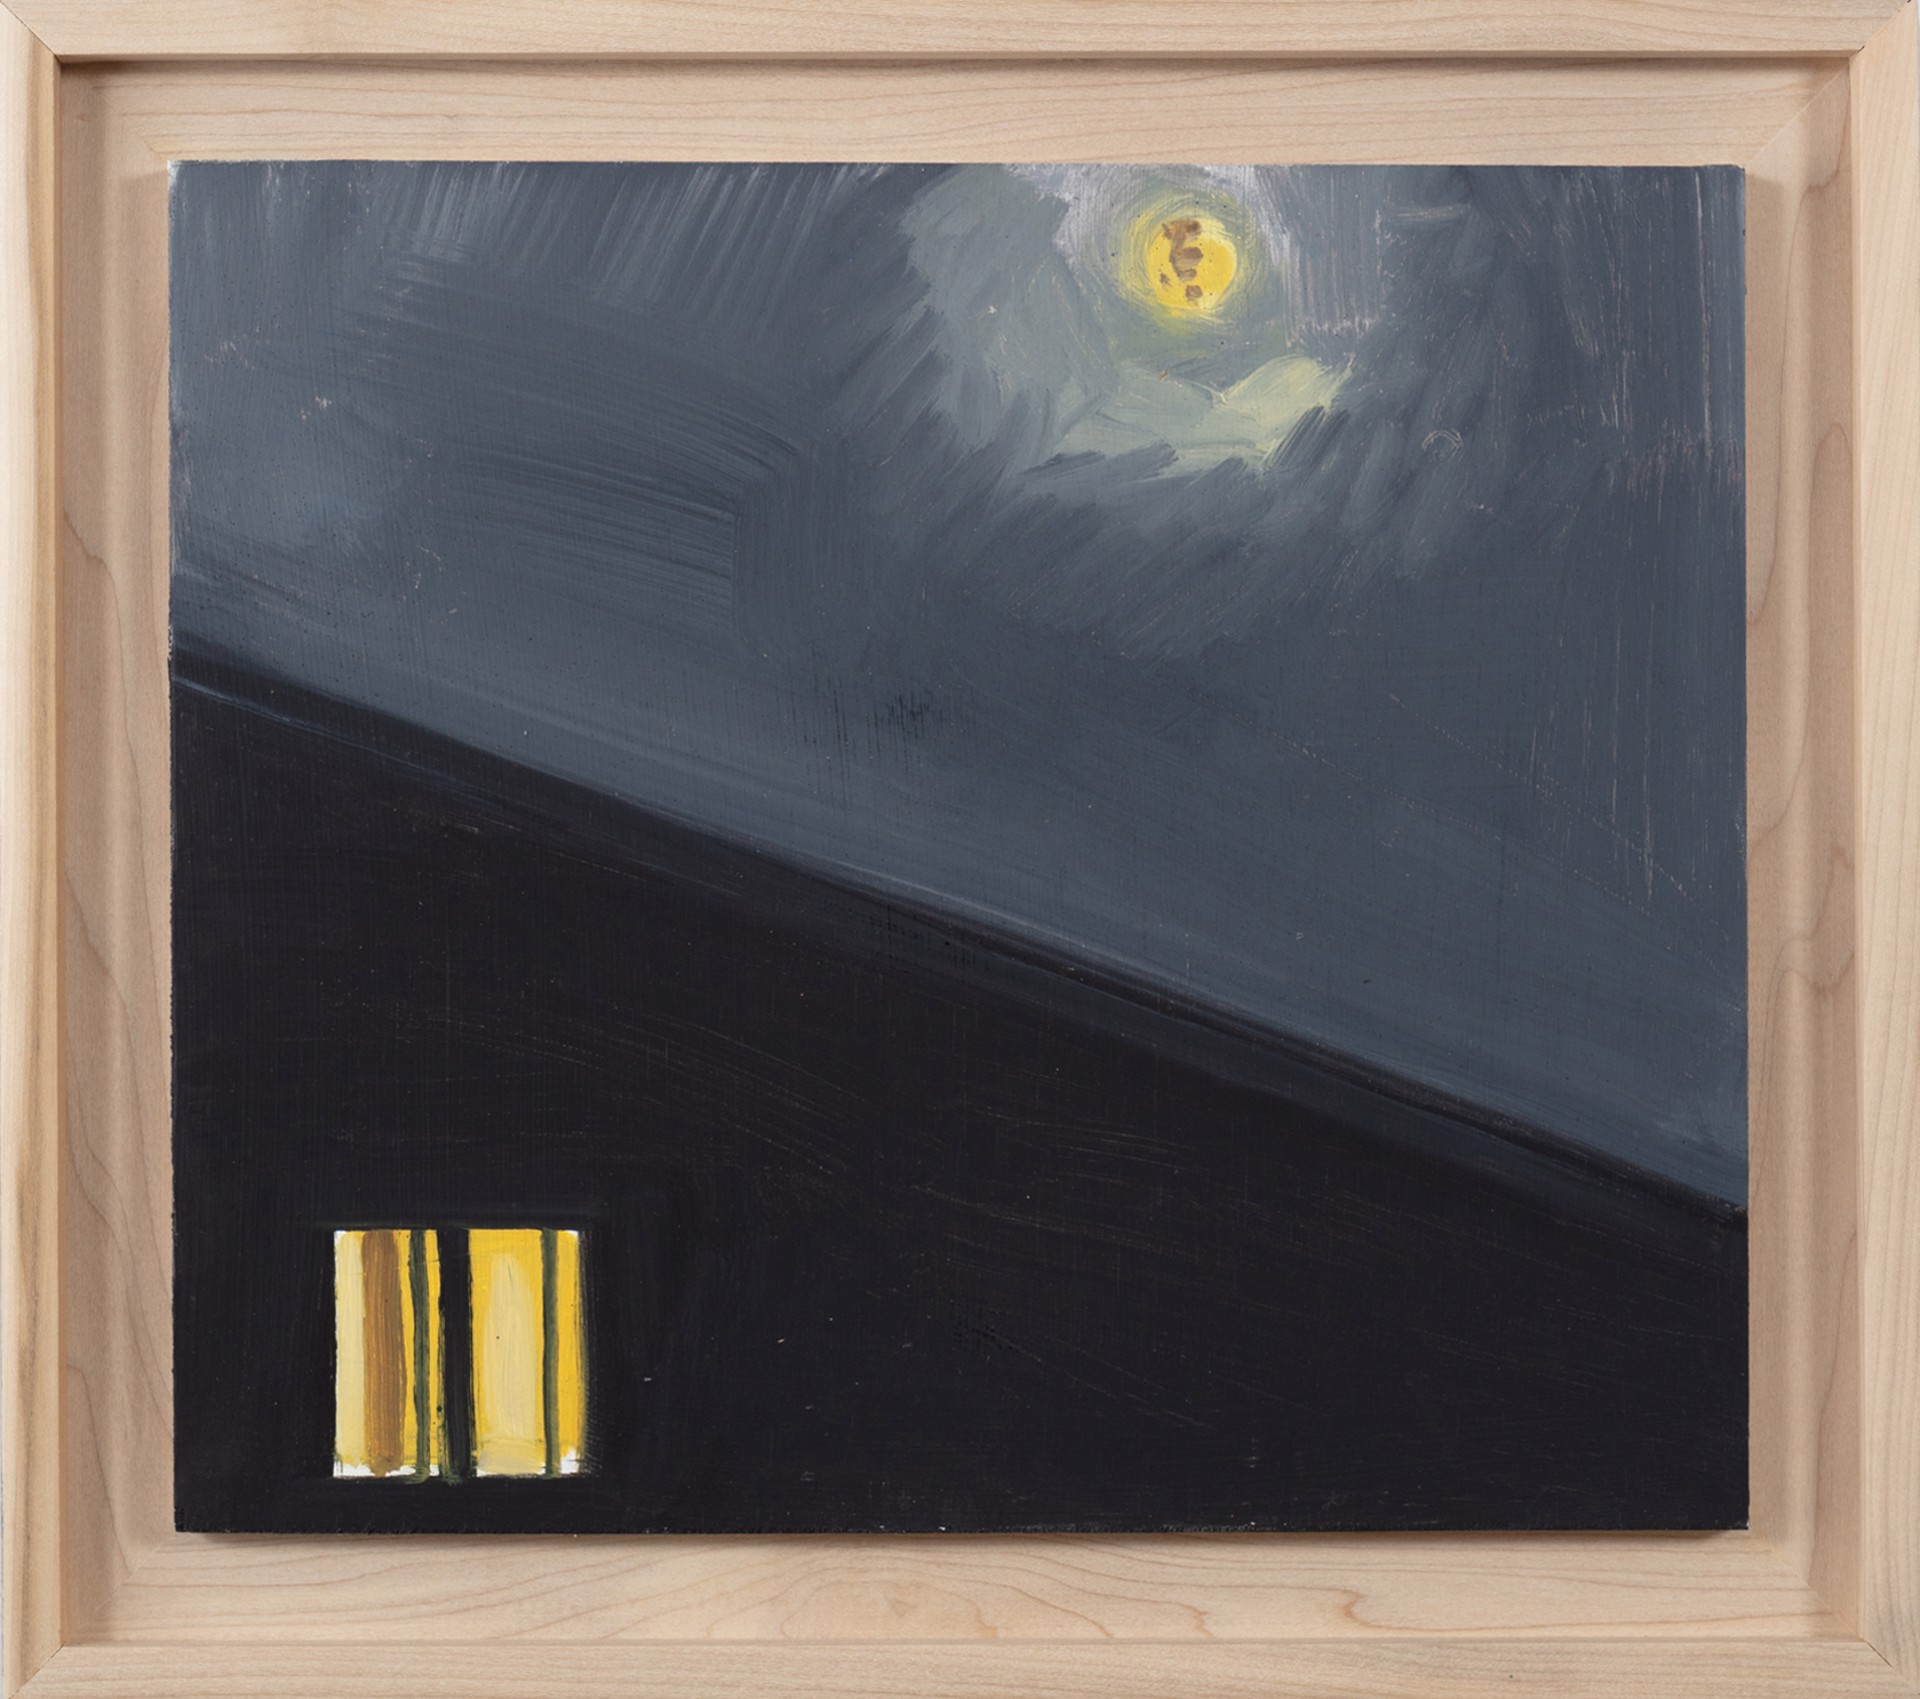 House at Night with Moon by Alexander Rohrig